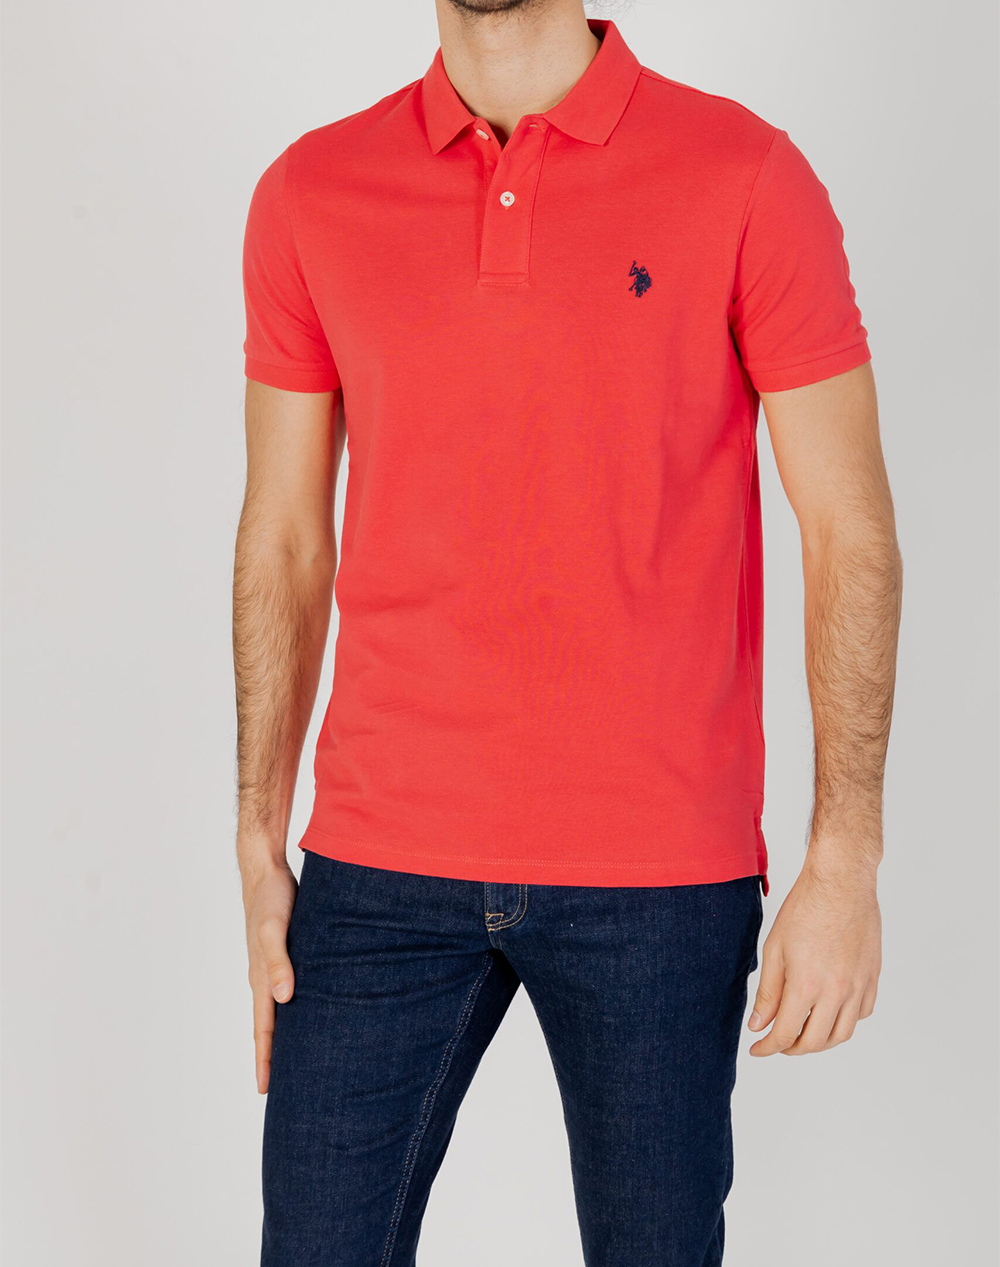 US POLO ASSN KING 41029 EHPD POLO PACK OF 400 ΜΠΛΟΥΖΑ ΑΝΔΡΙΚΟ 6735541029P400-352 OrangeRed 3820A0USP3400003_XR29006